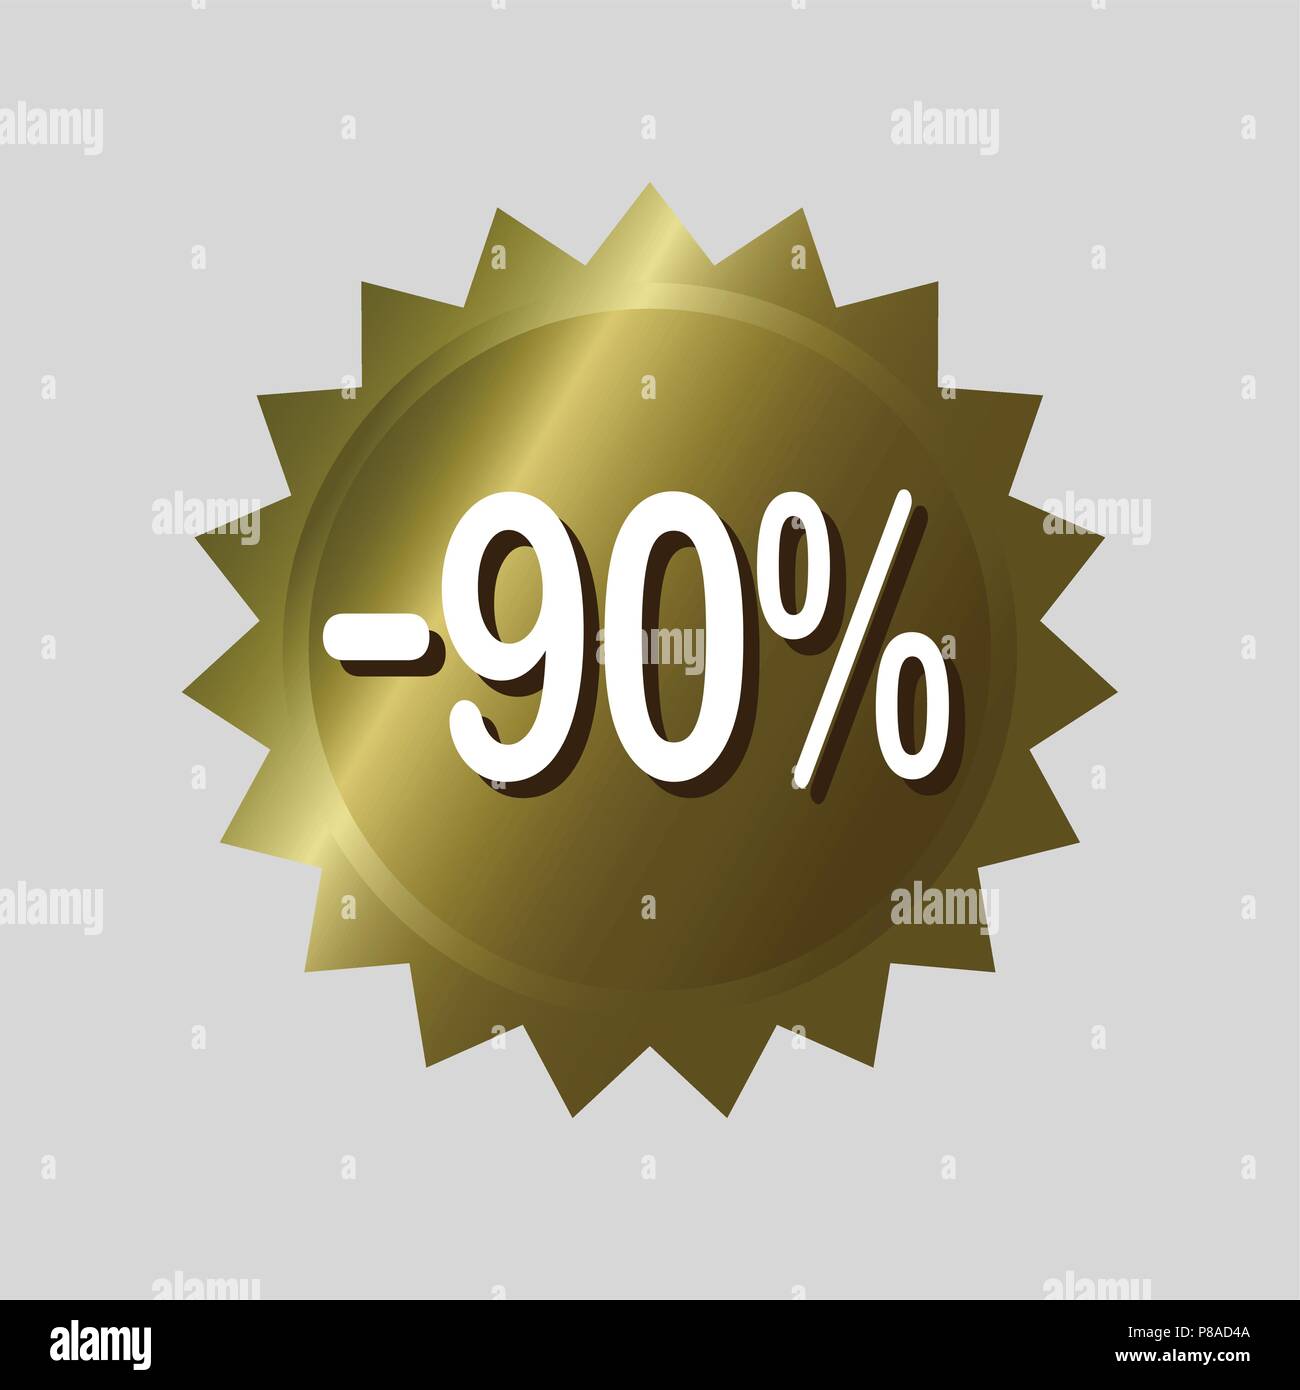 Price tag, '90% off' discount sticker. Golden vector label design on isolated background. Stock Vector